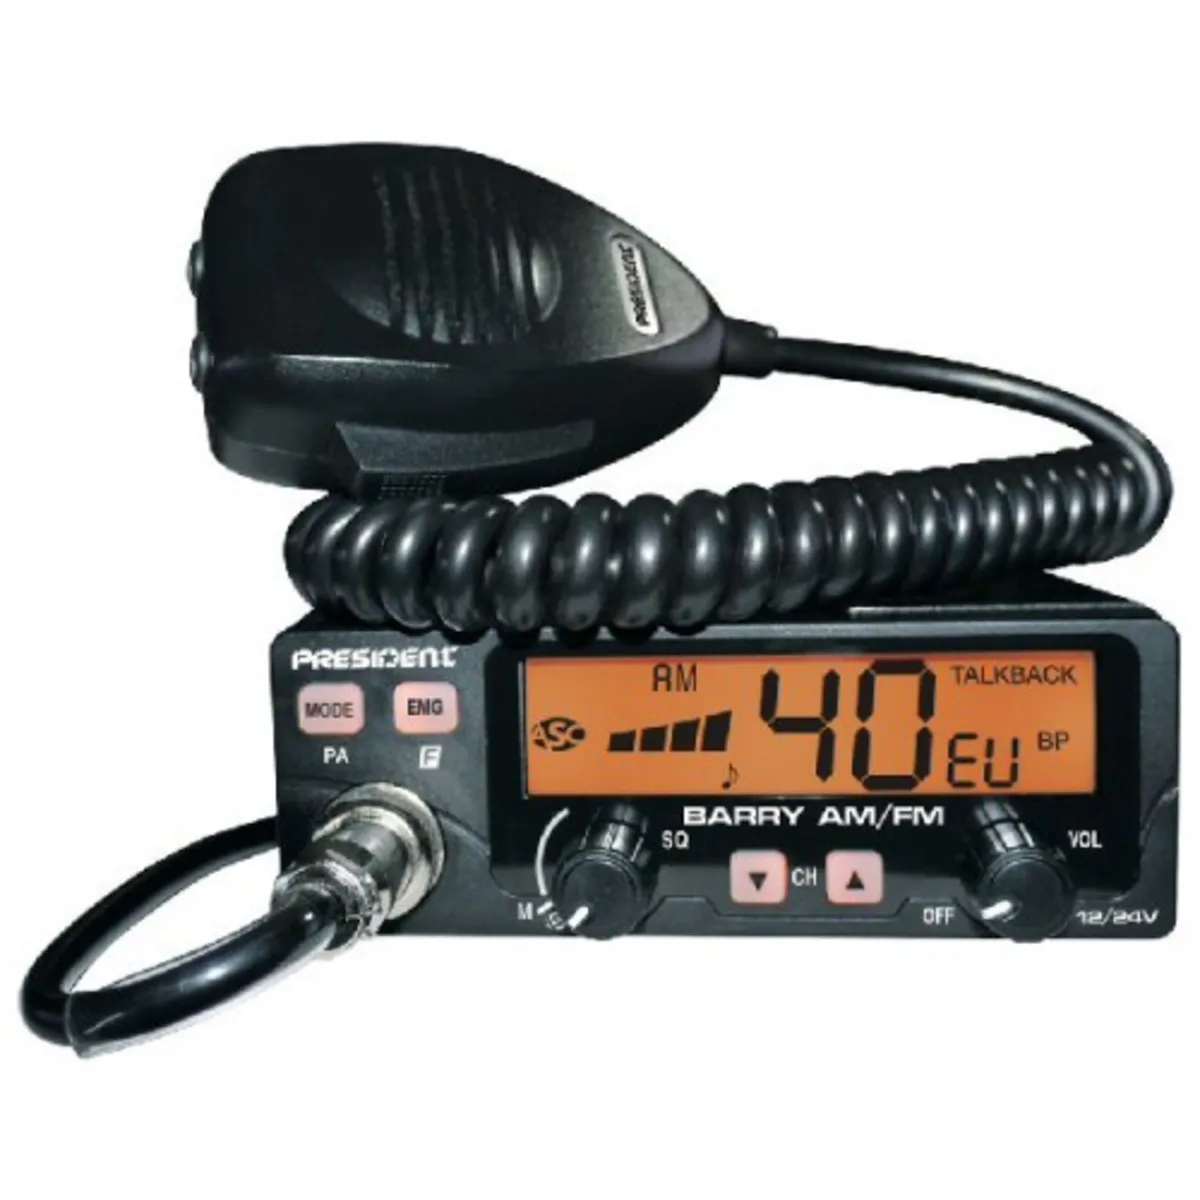 CB RADIO, SCANNERS,  AERIALS AND ACCESSORIES